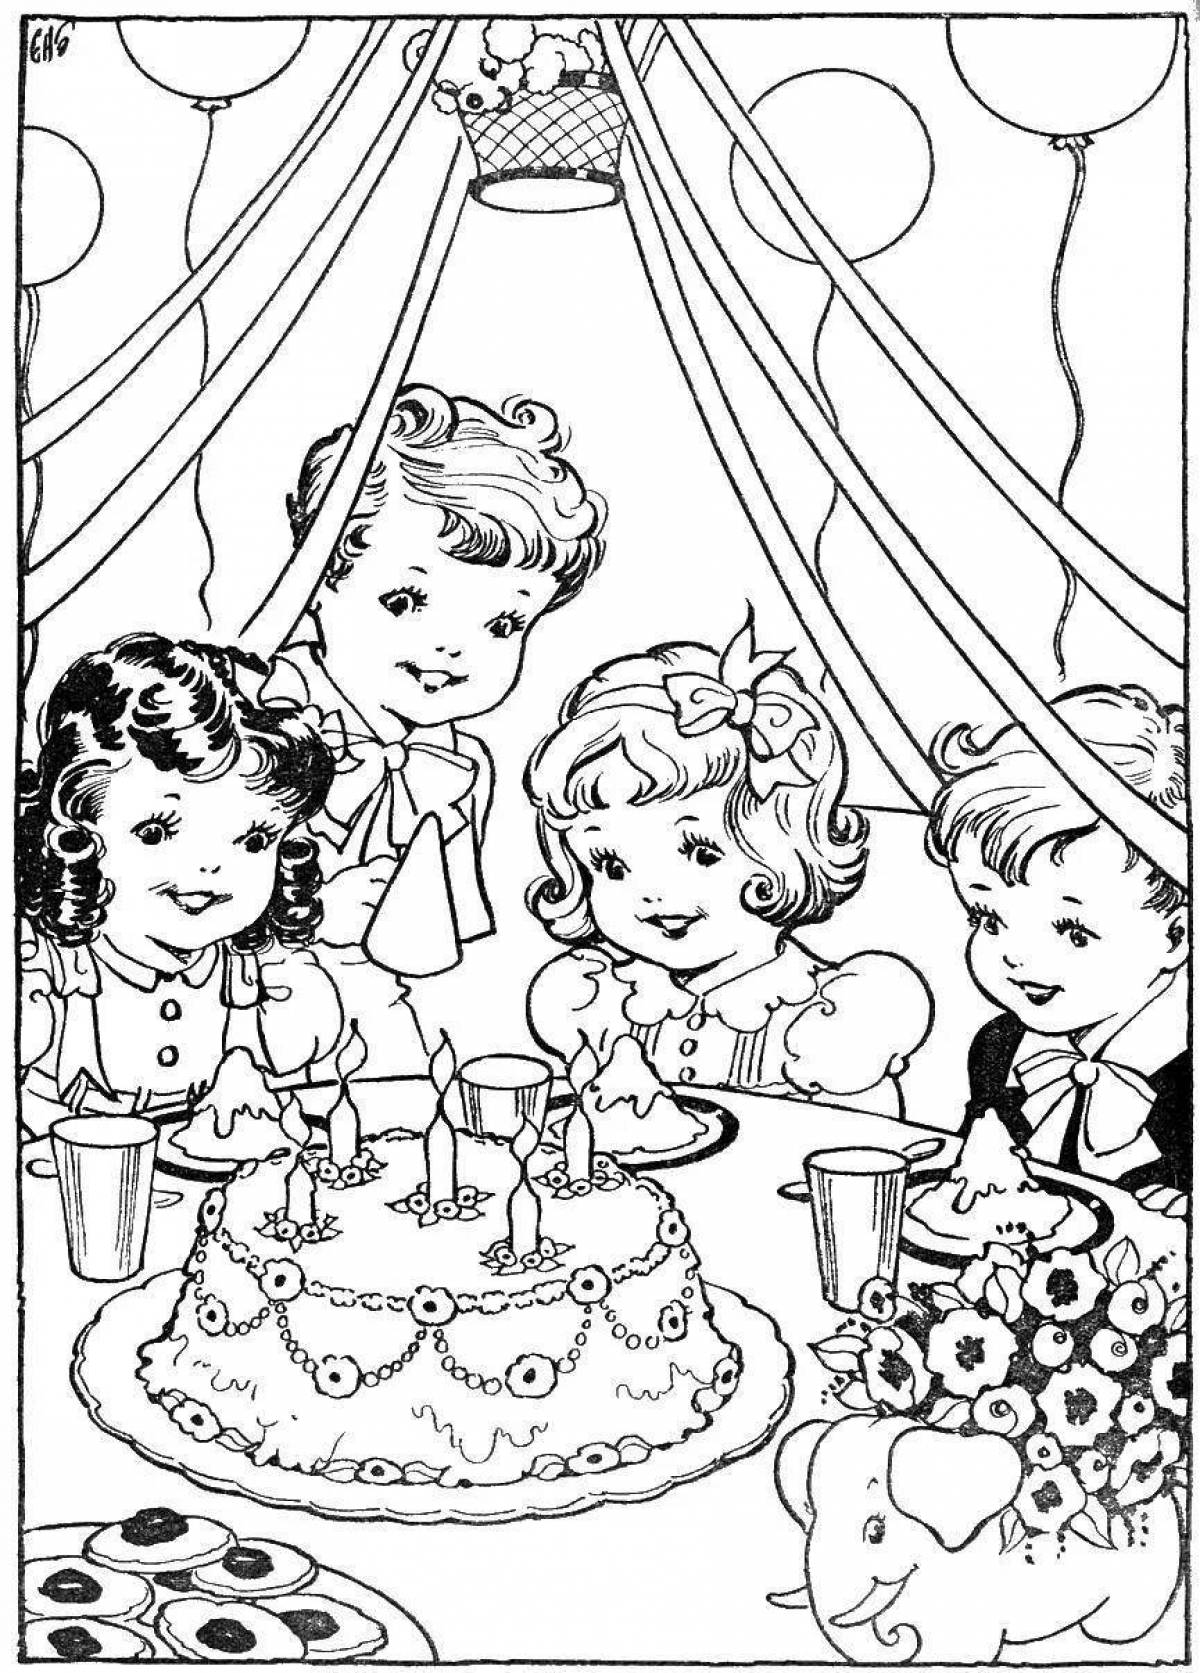 Coloring page cheerful festive table